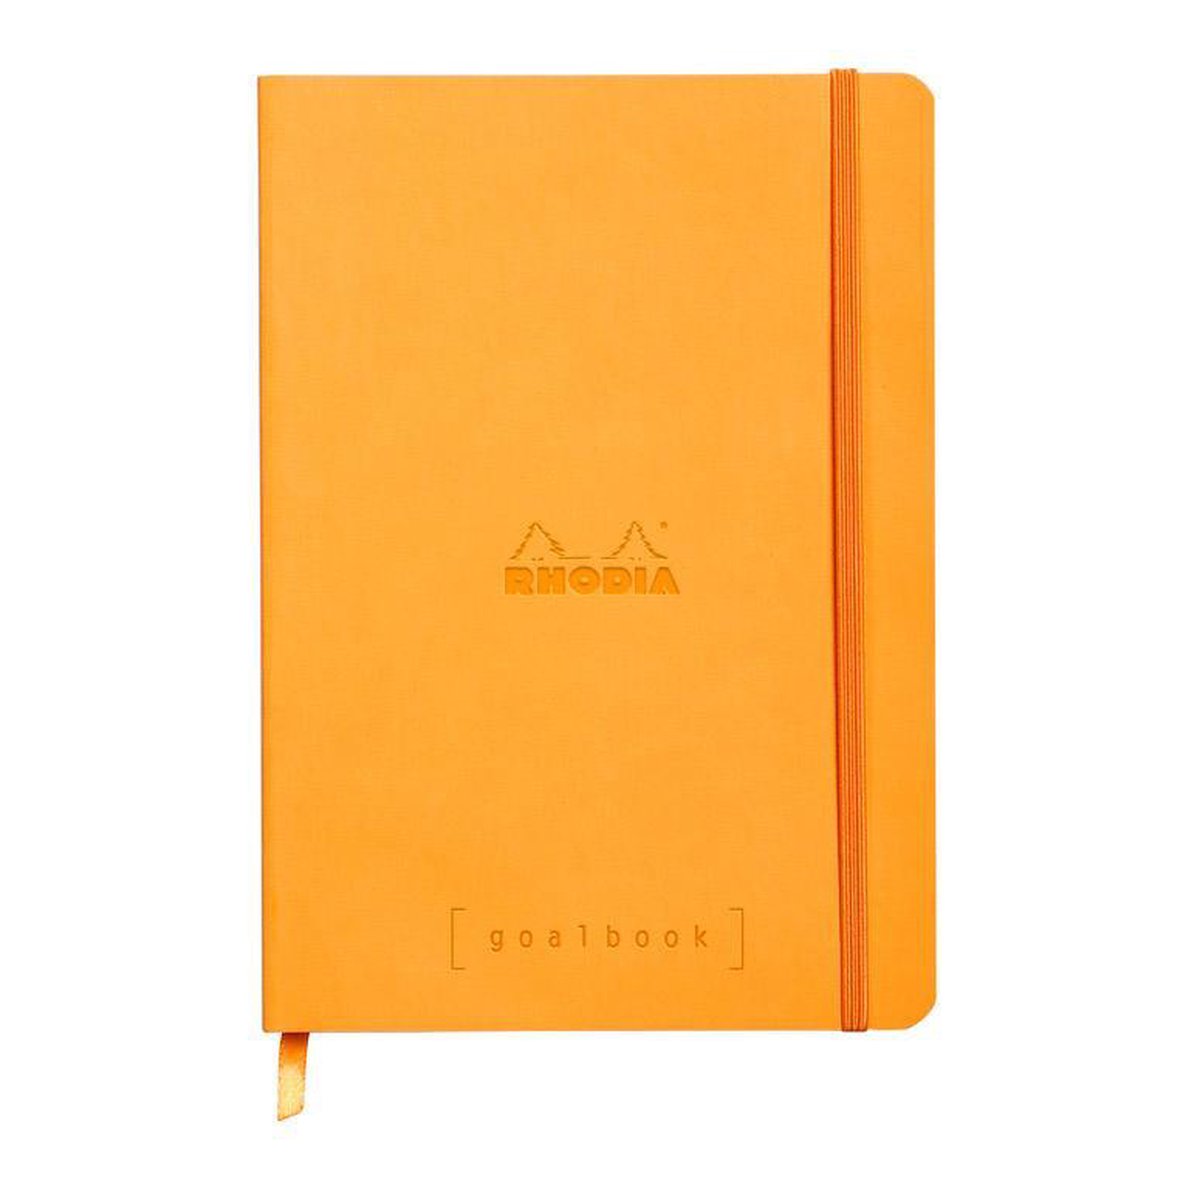 Rhodia Goalbook – Bullet Journal – A5 – 14,8x21cm – Softcover – Gestippeld – Dotted – Oranje [Wit Papier]